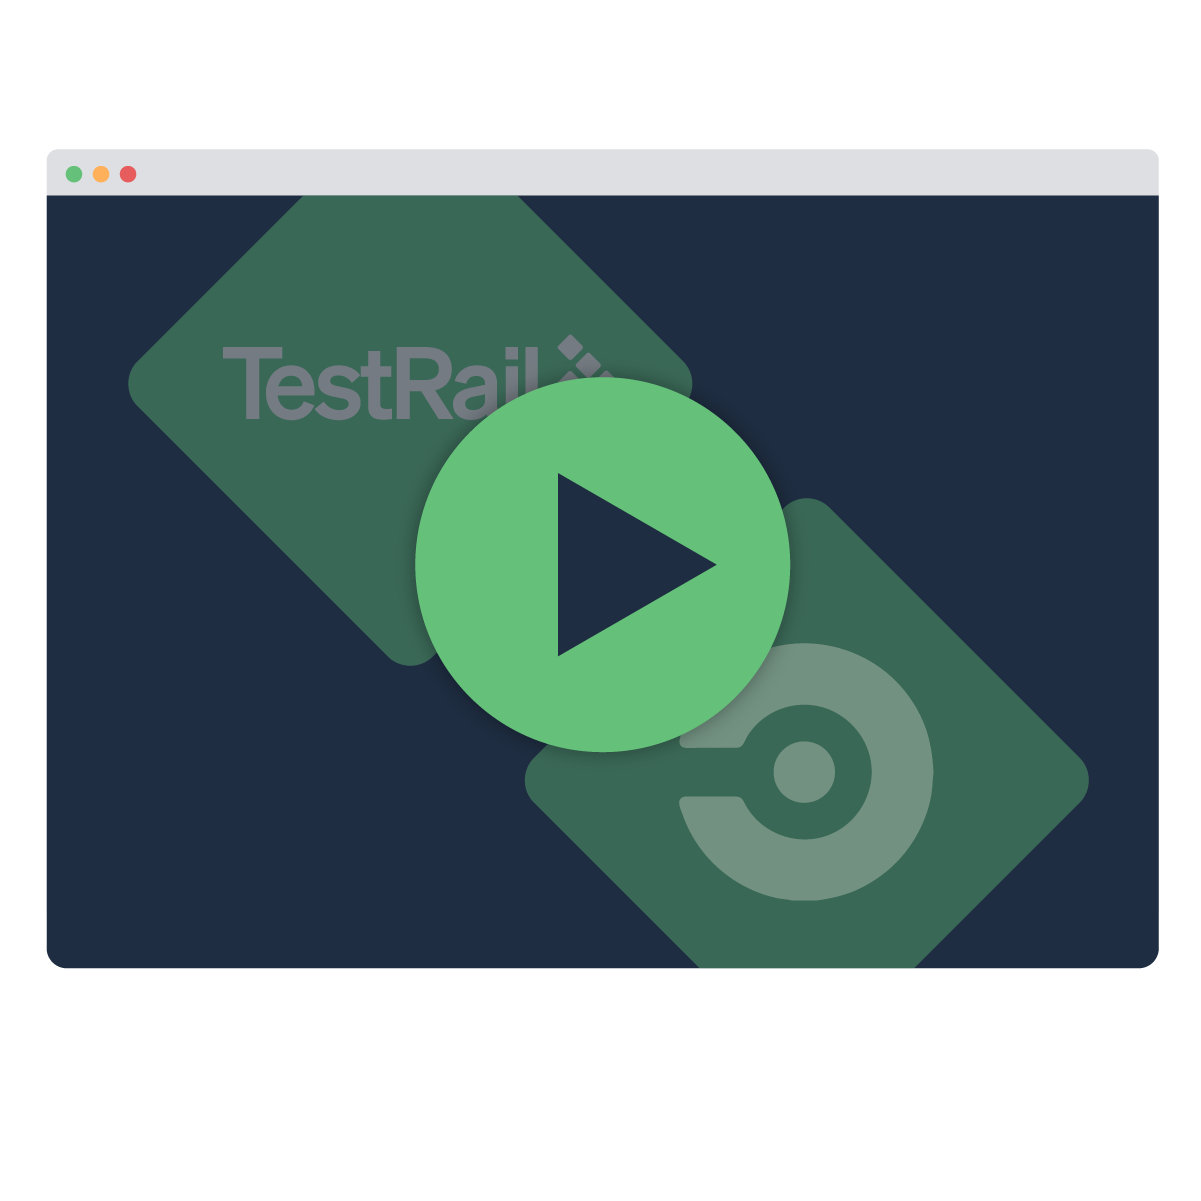 How to quickly integrate TestRail with CircleCI